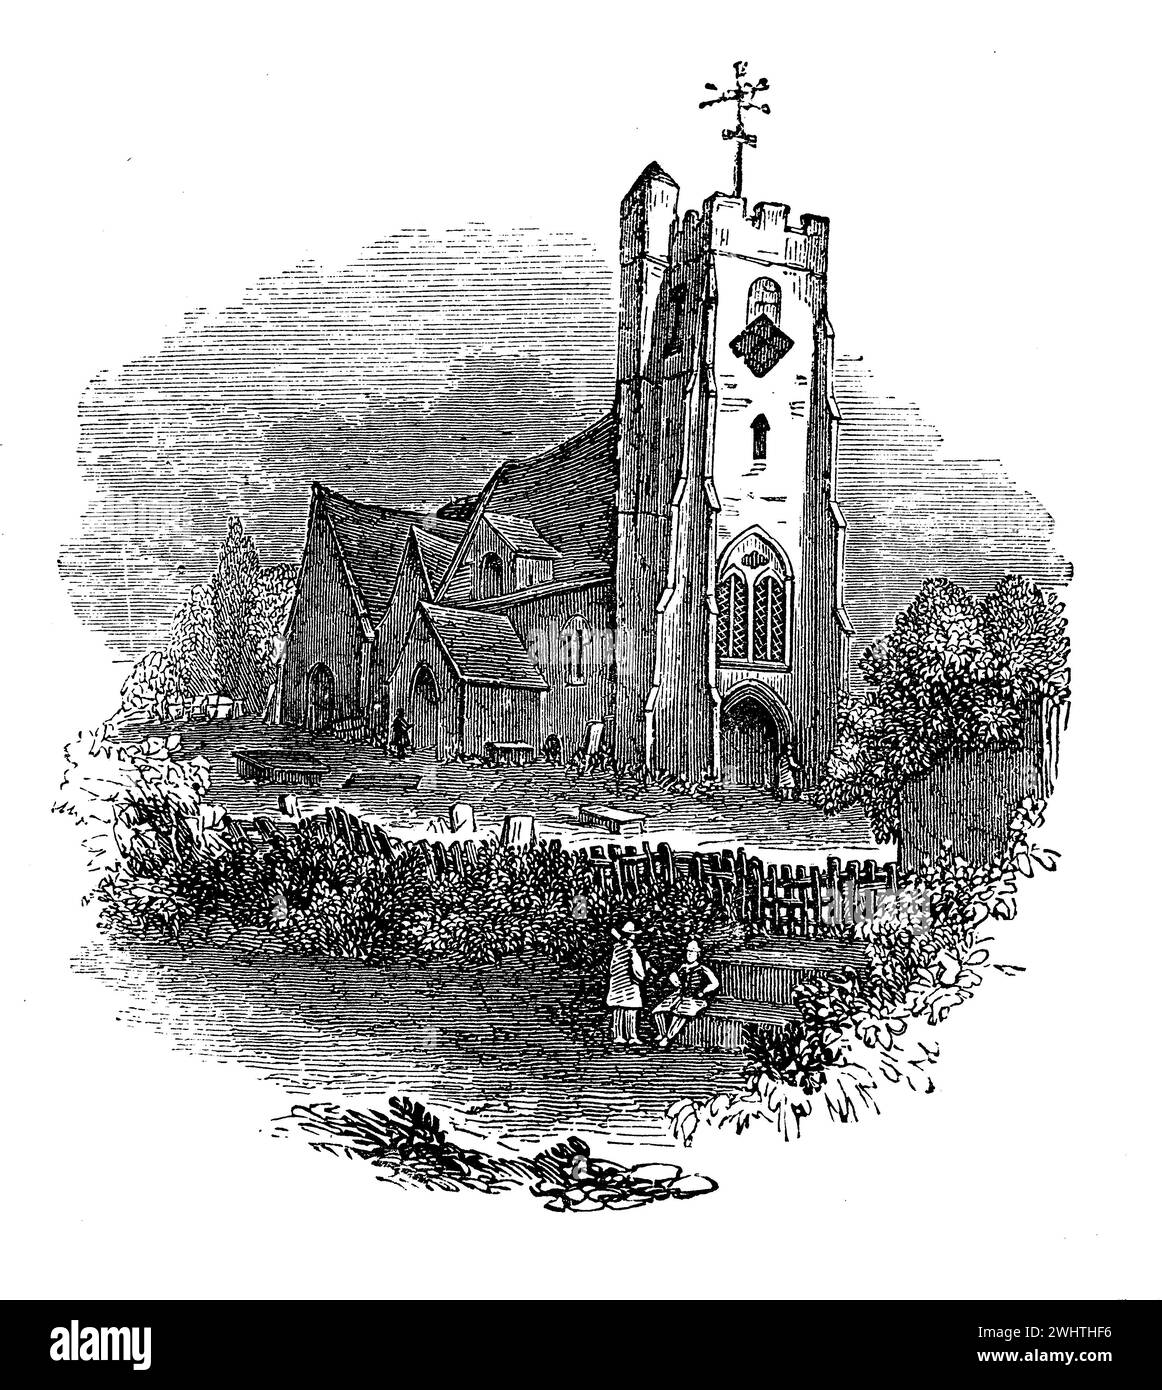 Church of St Mary and St Nicholas, Leatherhead , Surrey; 19th century sketch. Black and White Illustration from the 'Old England' published by James Sangster in 1860. Stock Photo